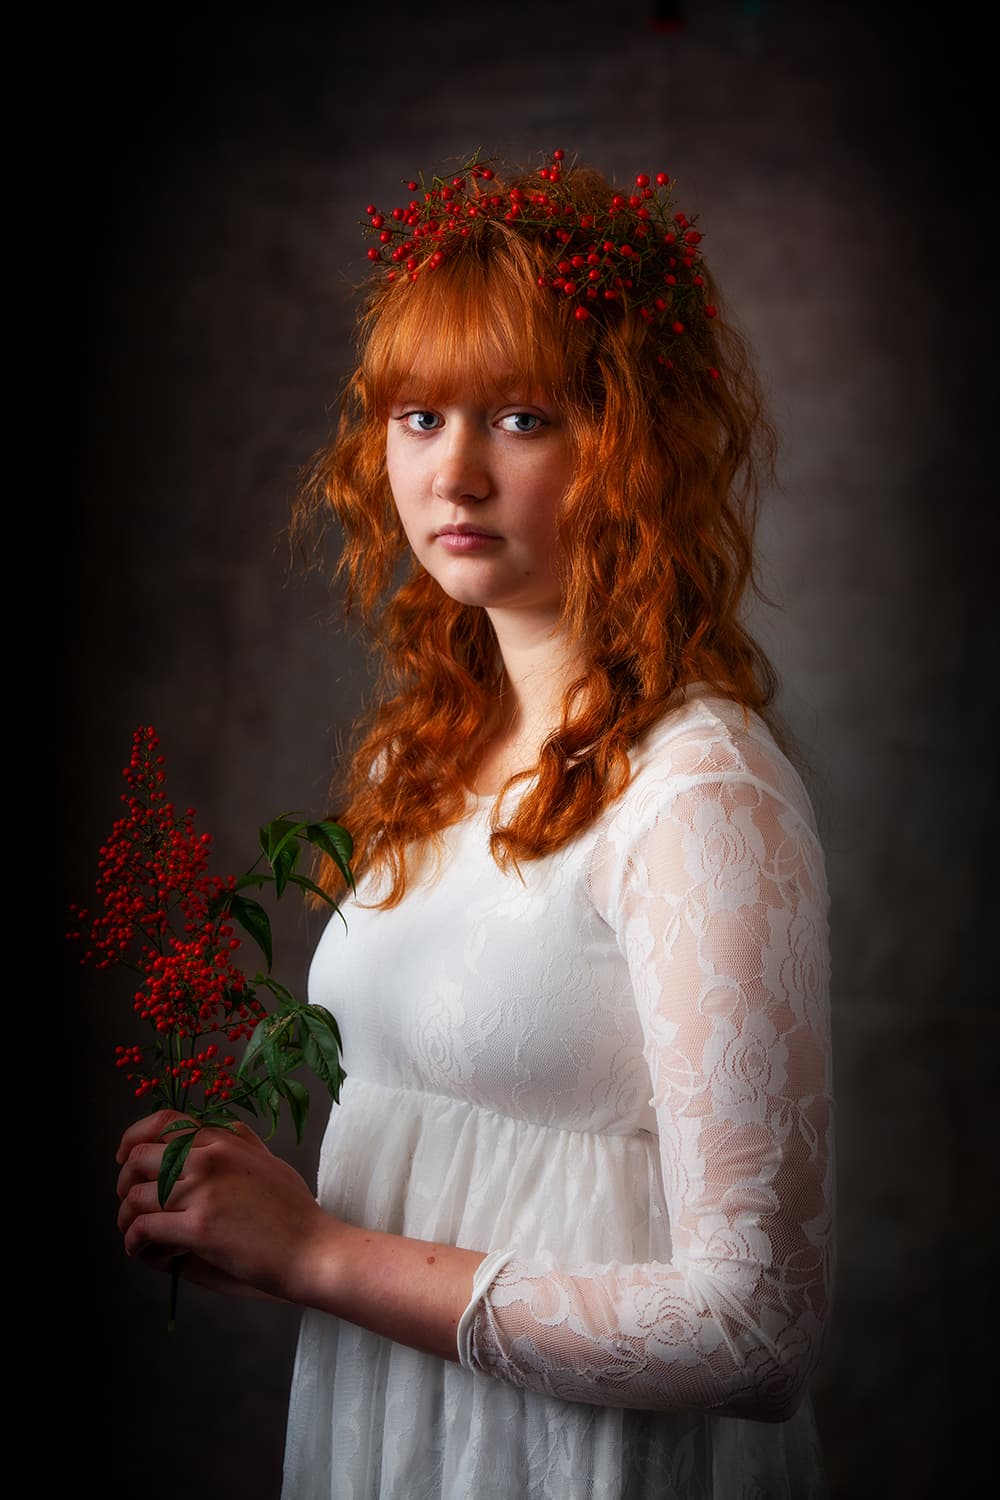 Teen portrait of a red haired girl holding red berries in a white dress.